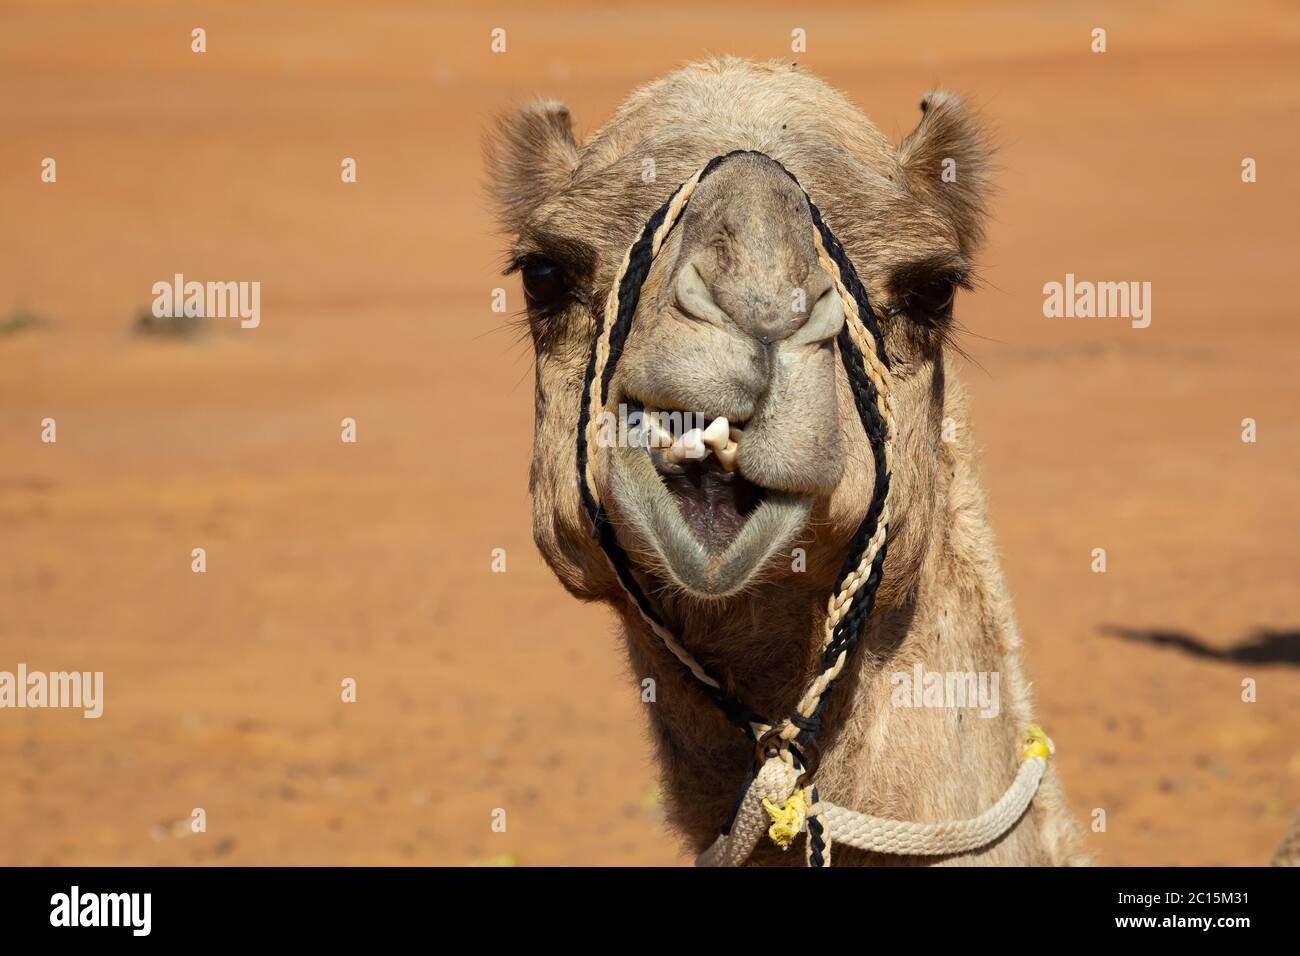 Portrait of dromedary camel in Wahiba Sands desert of Oman, frontal view with absurdly crooked teeth Stock Photo